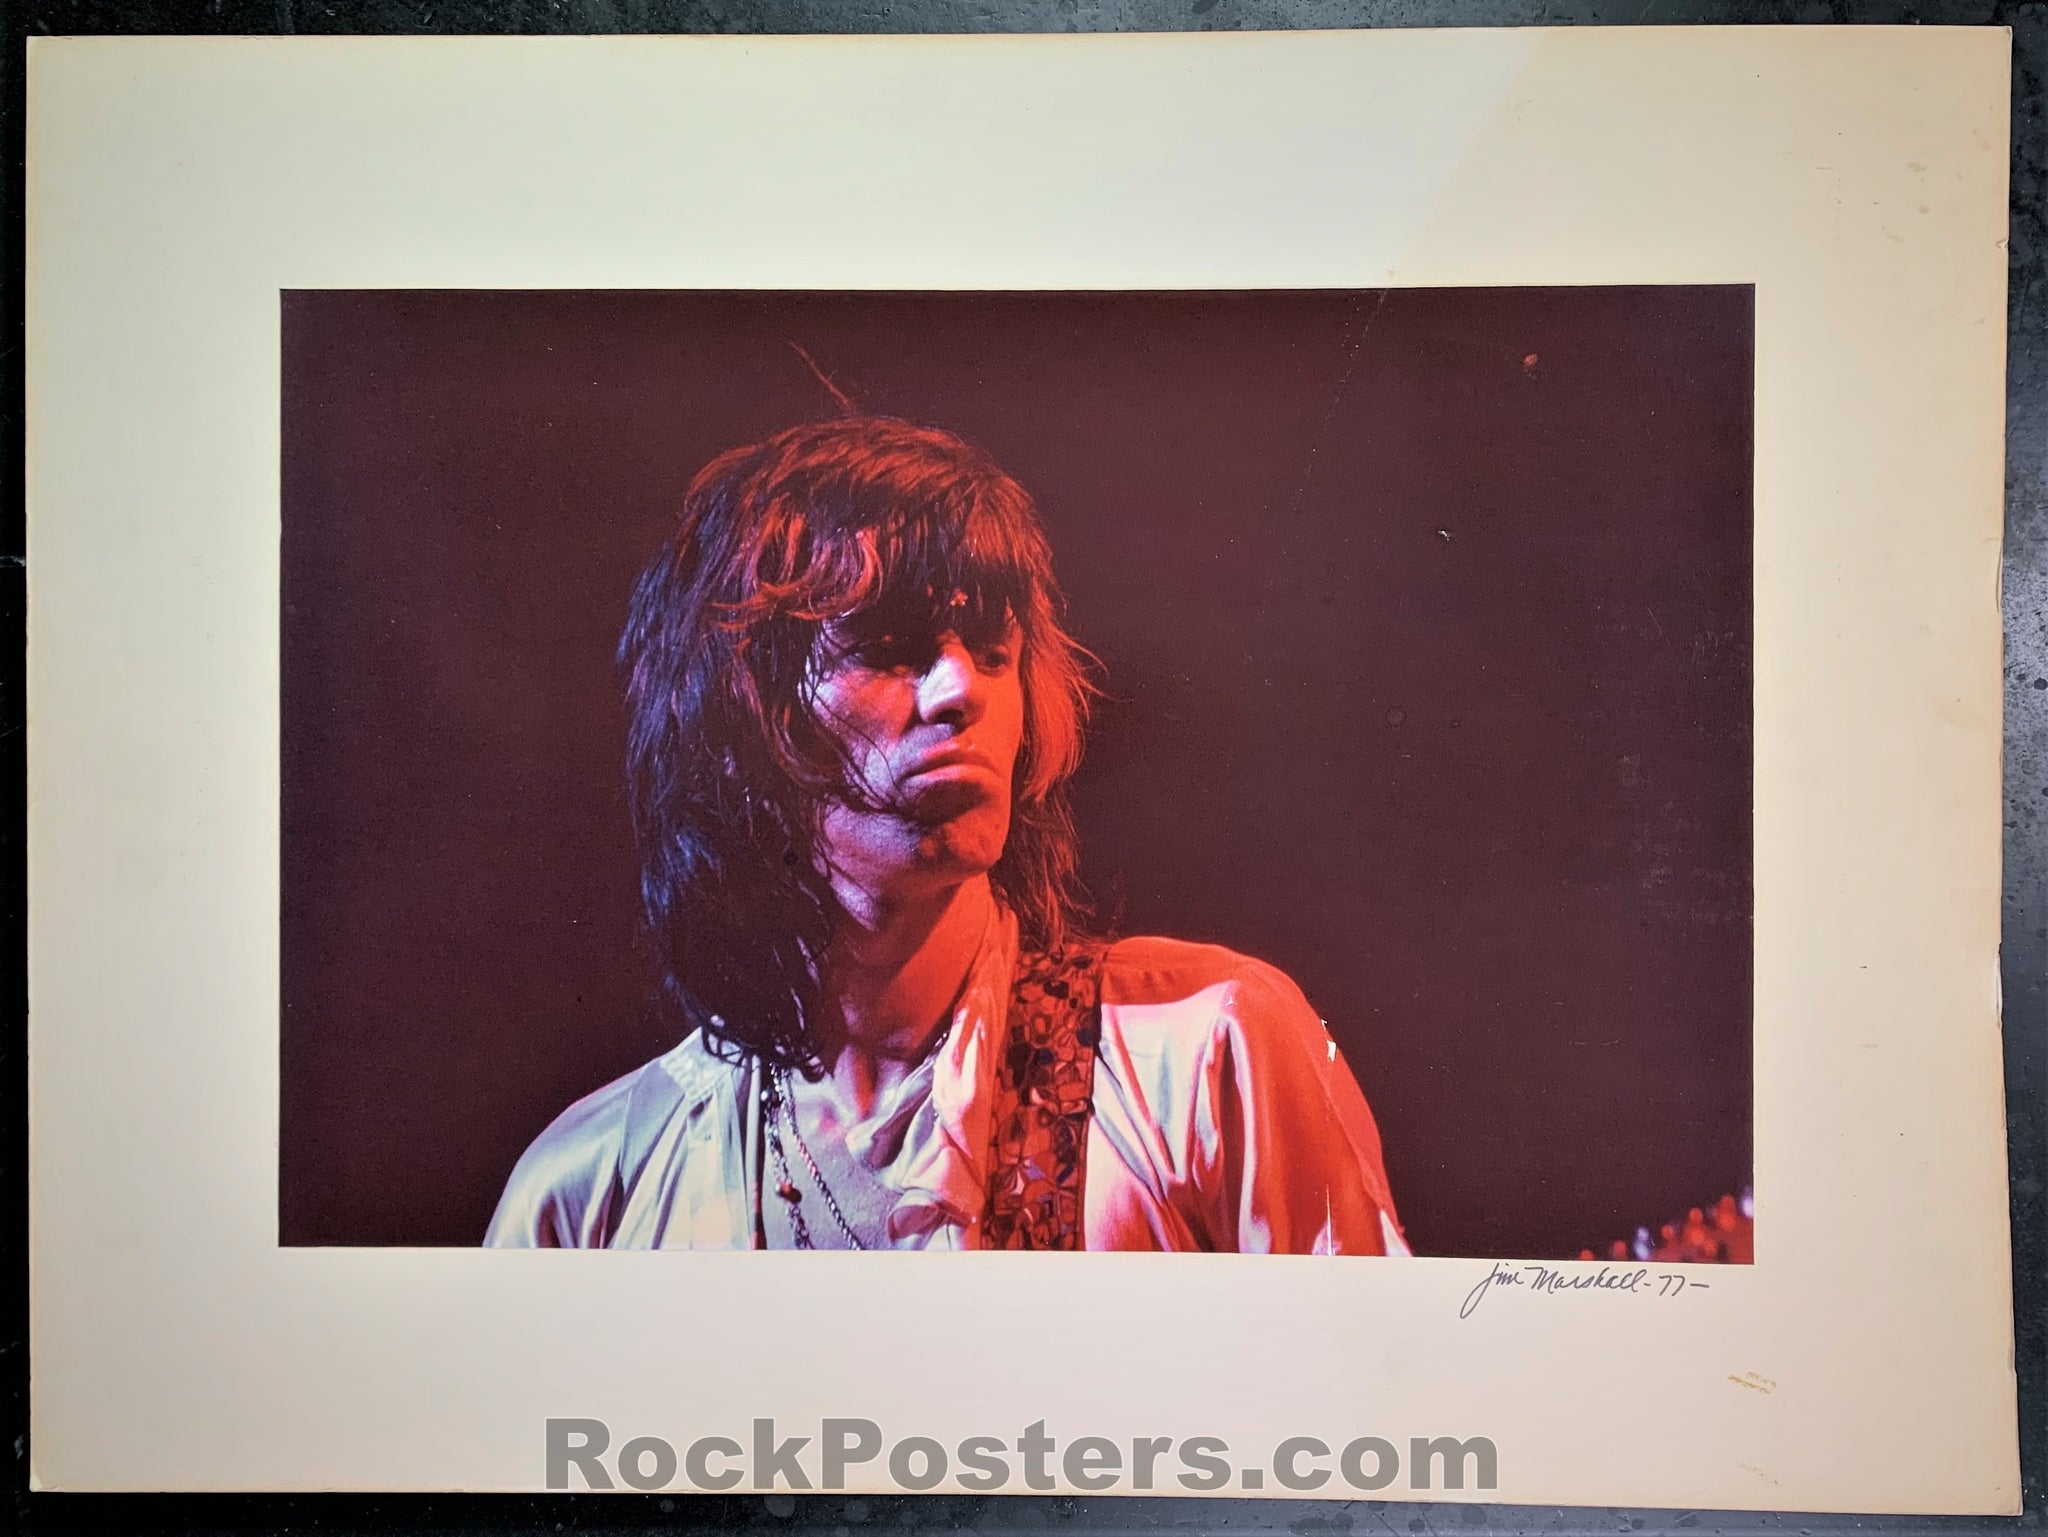 Rolling Stones - Keith Richards - Jim Marshall Signed - 1977 Concert Photograph - Excellent